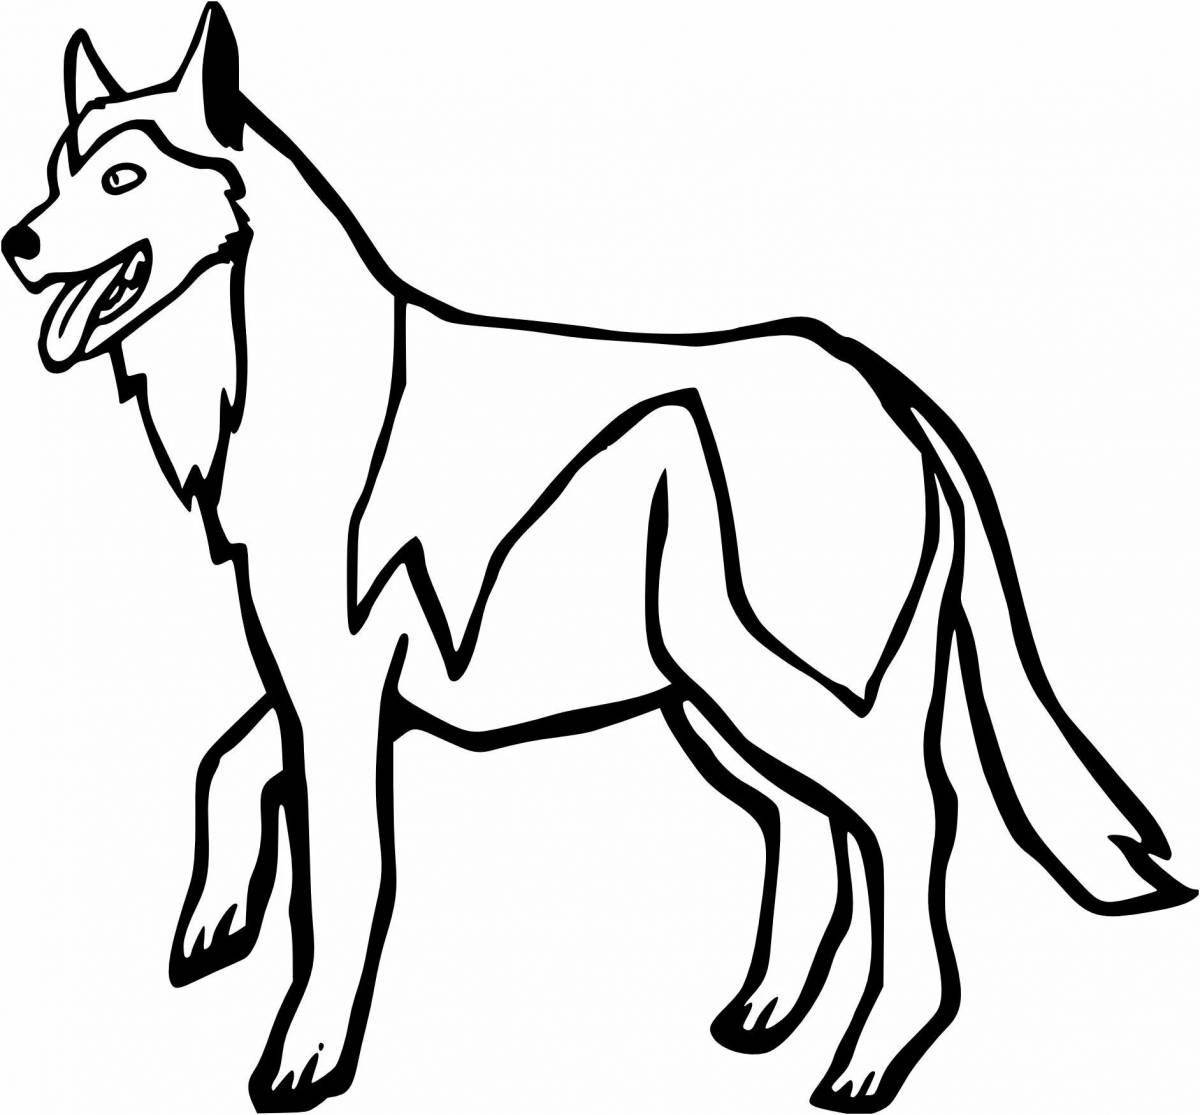 Husky fluffy coloring book